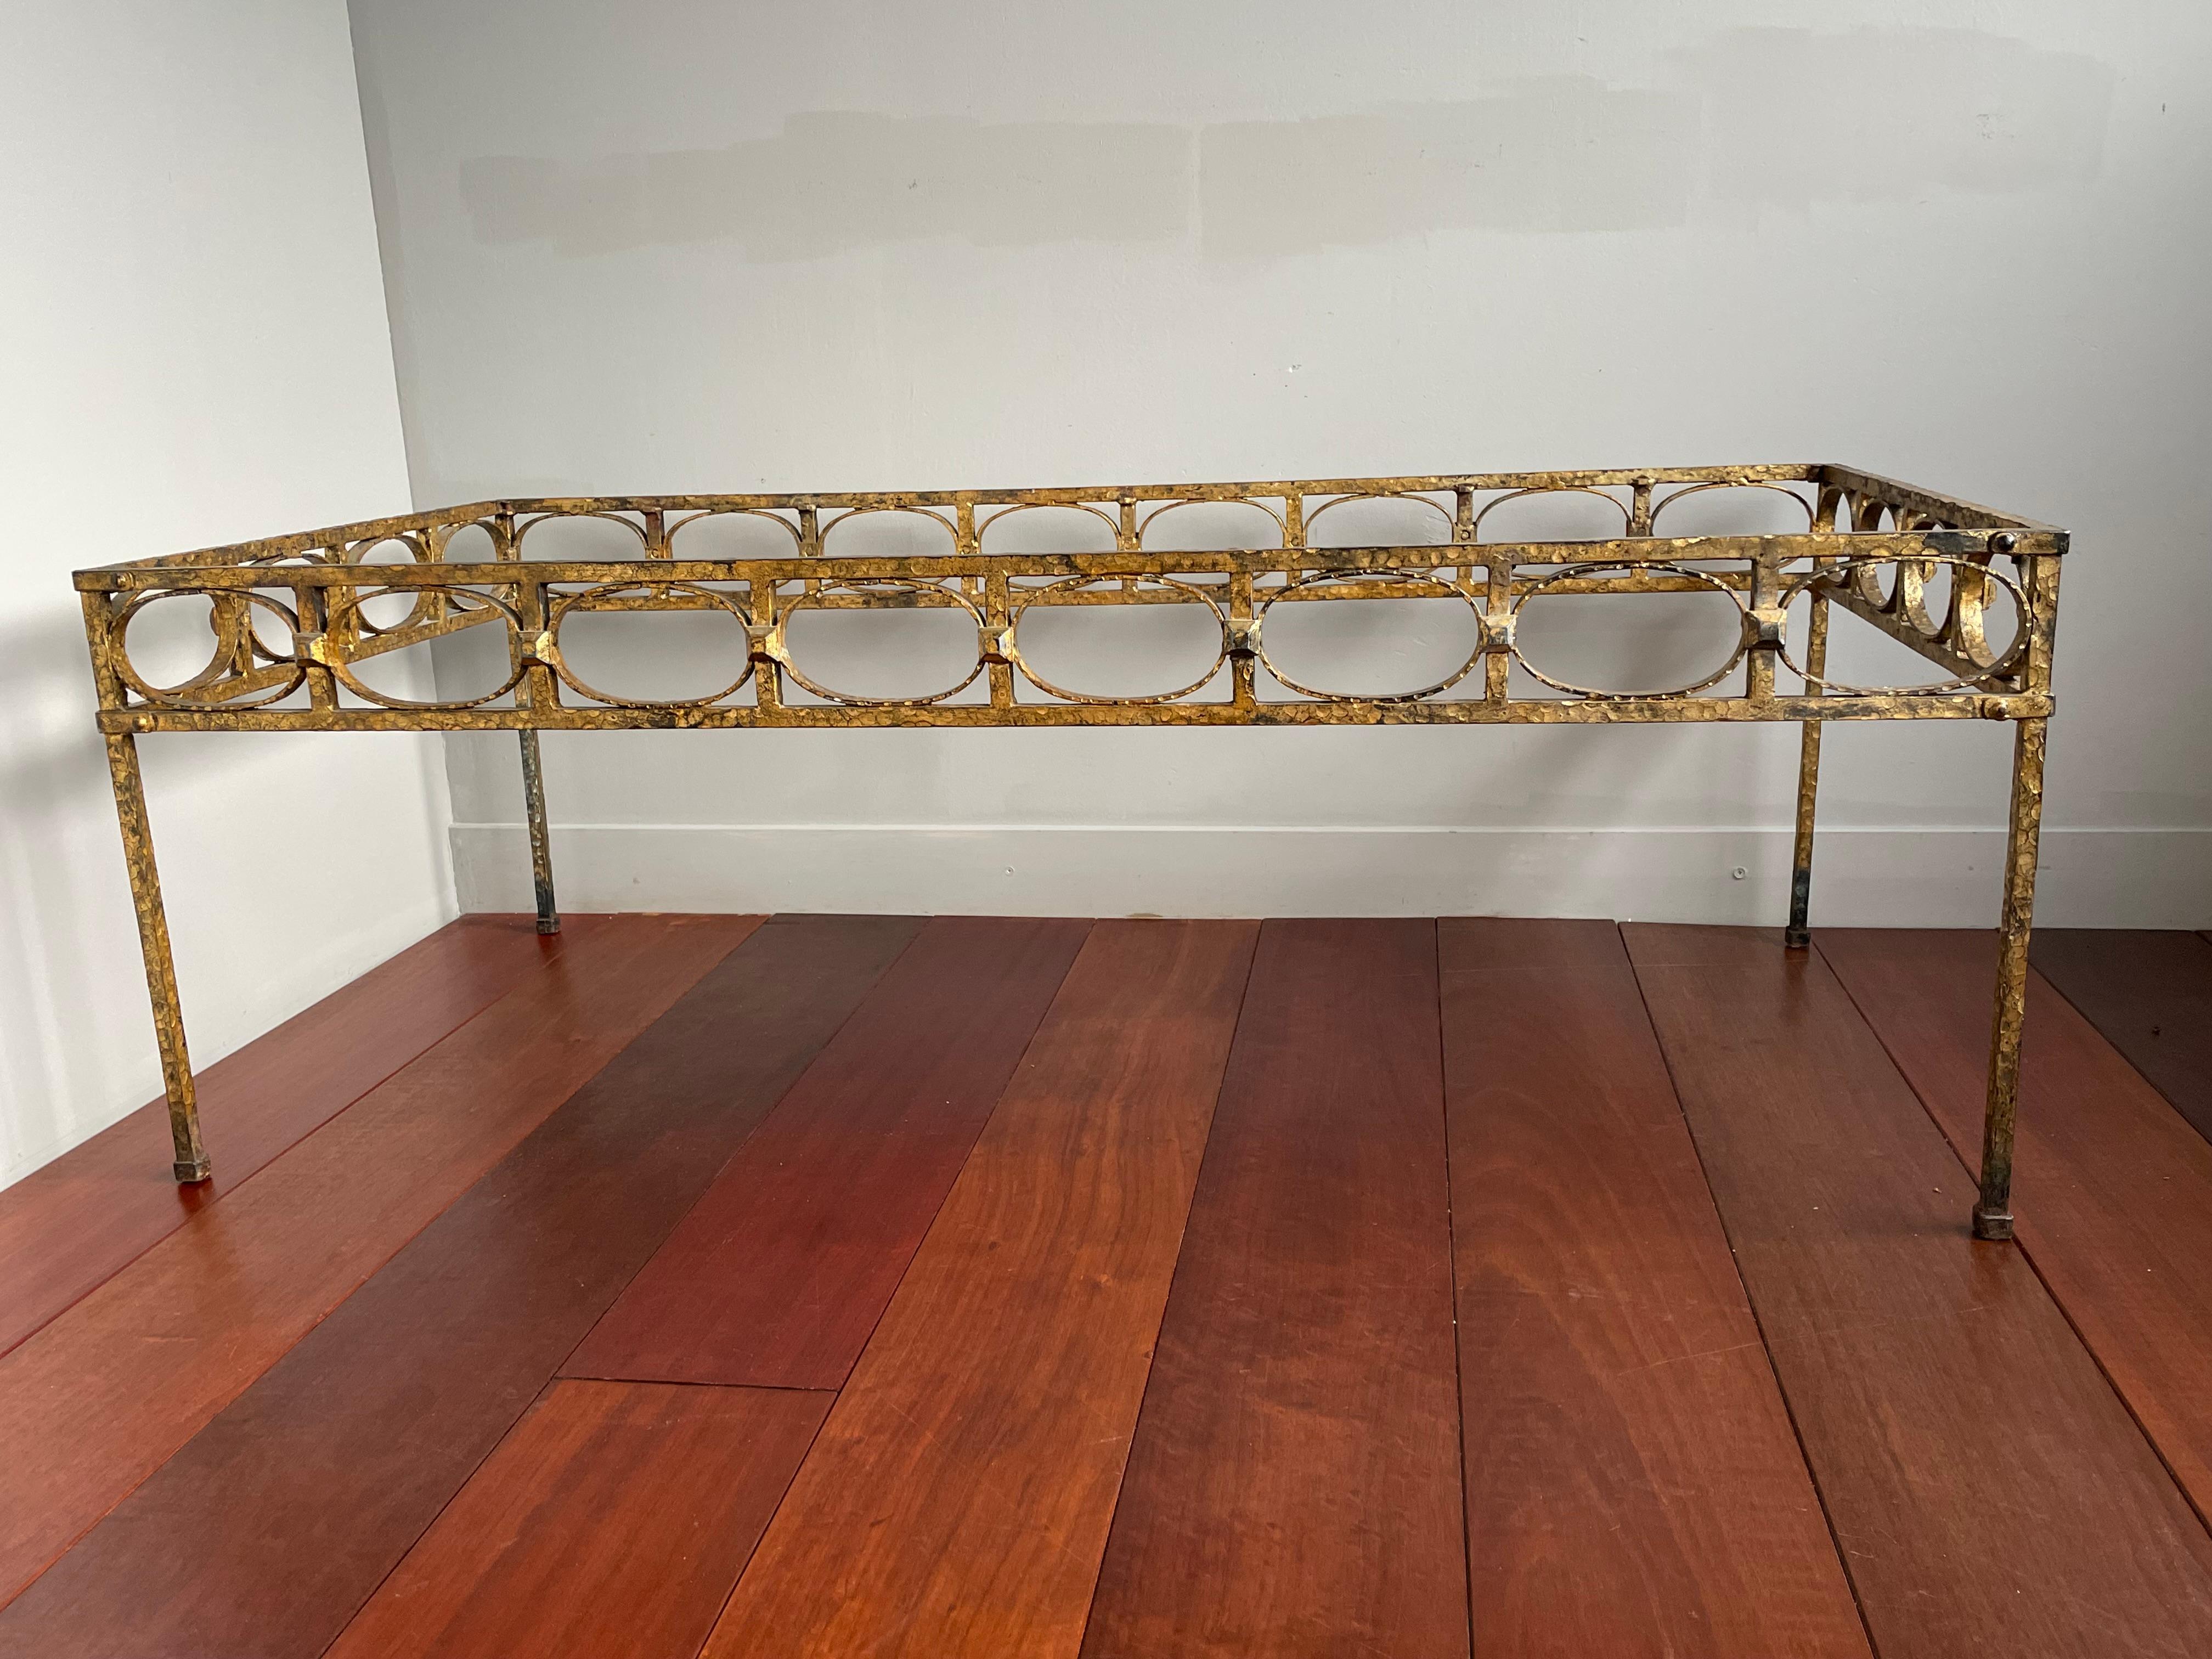 Stunning Midcentury Modern Gilt Wrought Iron Coffee Table Base by Ferro Art 1950 For Sale 7